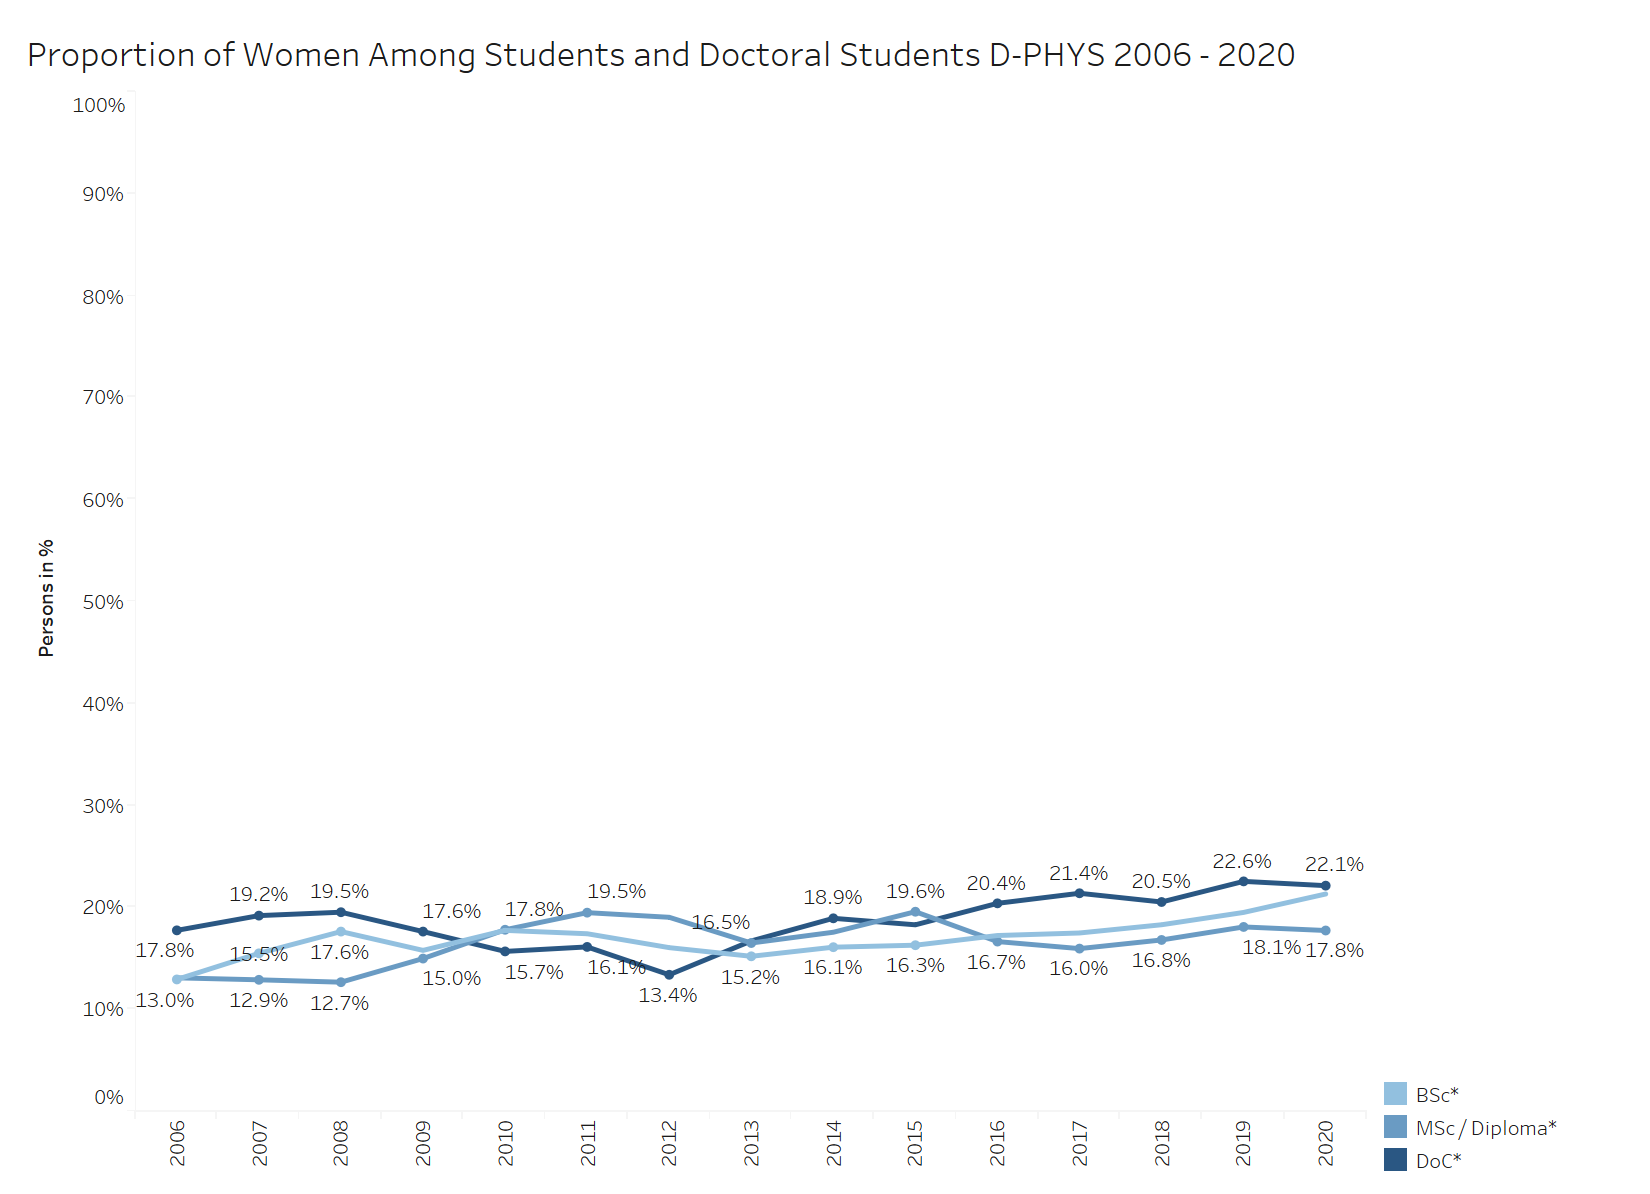 Proportion of Women Among Students and Doctoral Students D-PHYS 2006 - 2020